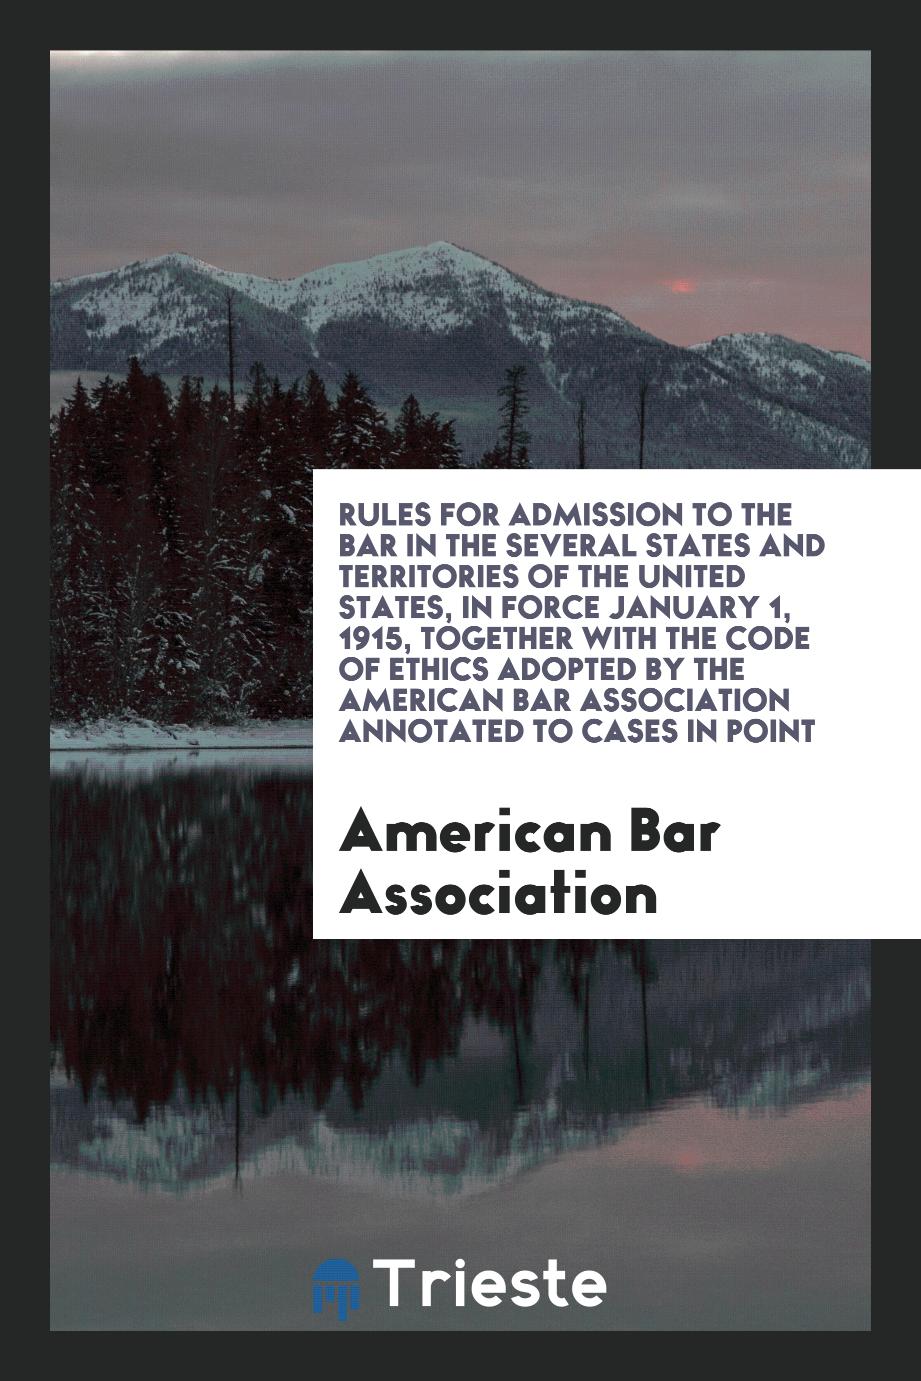 Rules for Admission to the Bar in the Several States and Territories of the United States, in Force January 1, 1915, Together with the Code of Ethics Adopted by the American Bar Association Annotated to Cases in Point